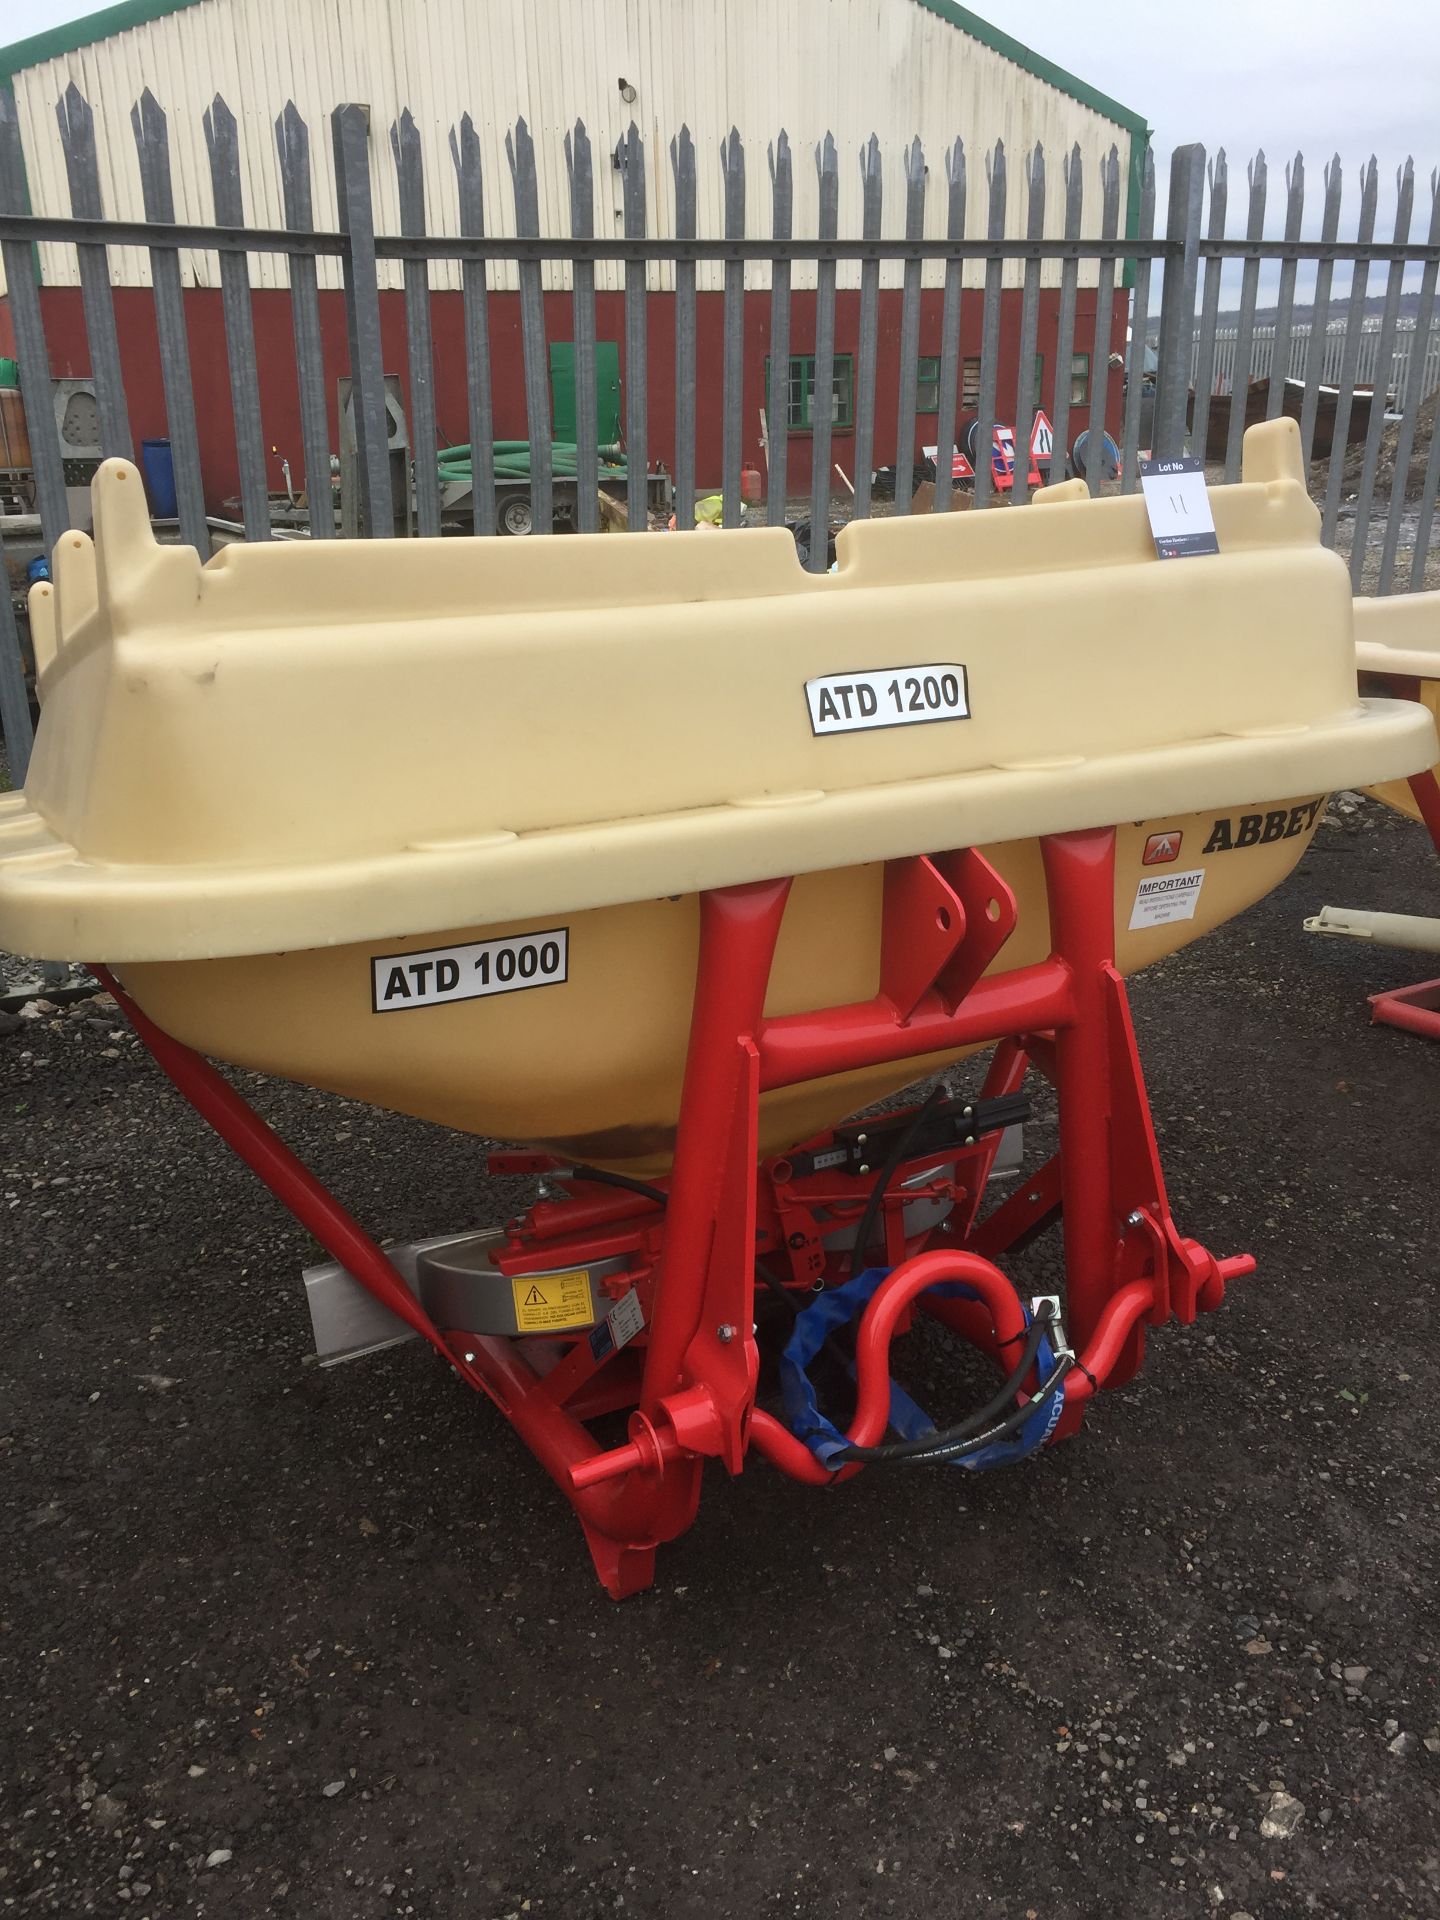 Abbey Machinery ATD 1200 twin disc fertilizer spinner (unused), Serial No. 62197 (2018)